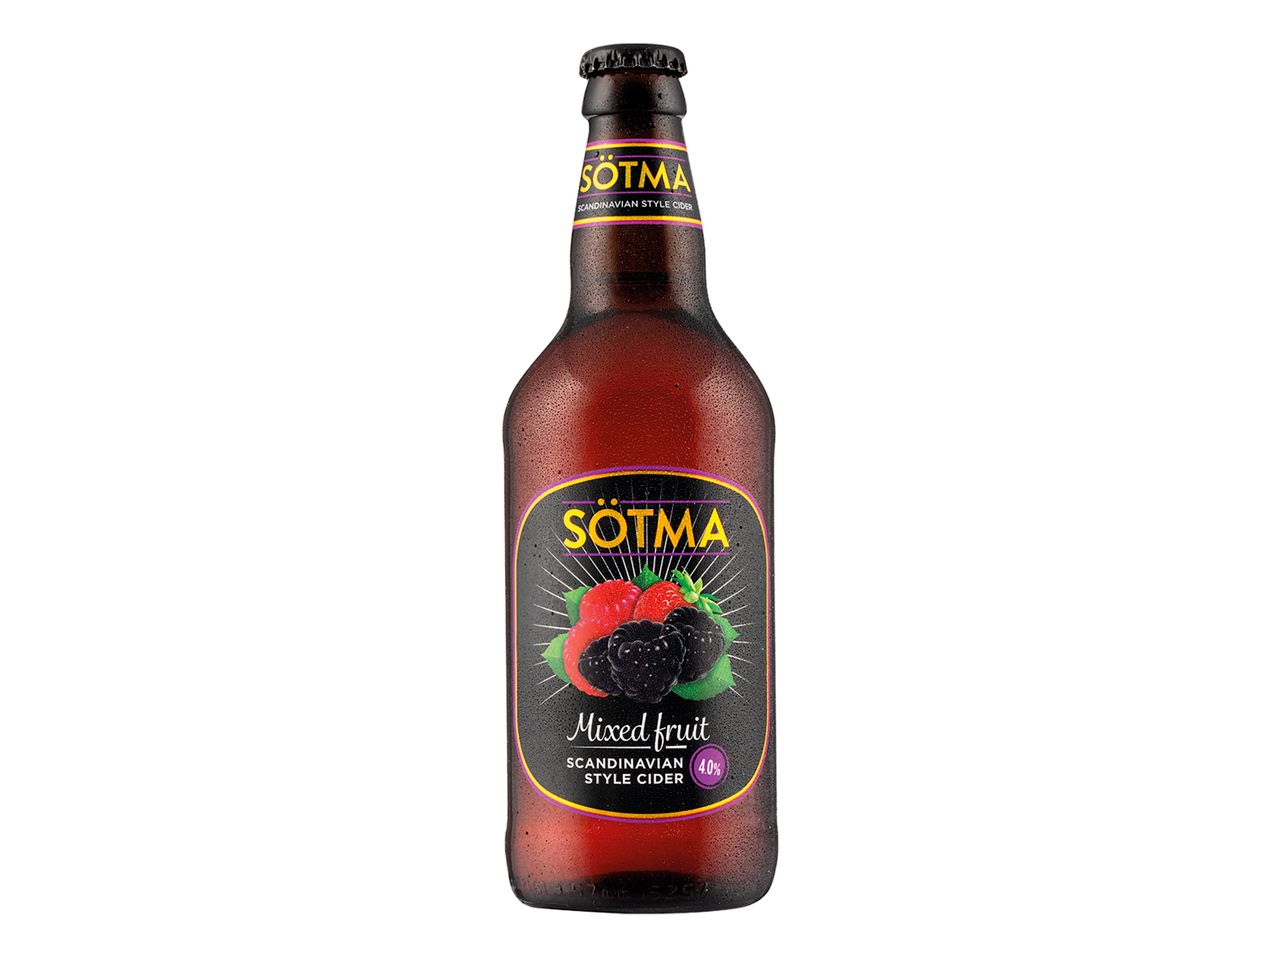 Go to full screen view: Sötma Swedish Mixed Fruit Cider - Image 1